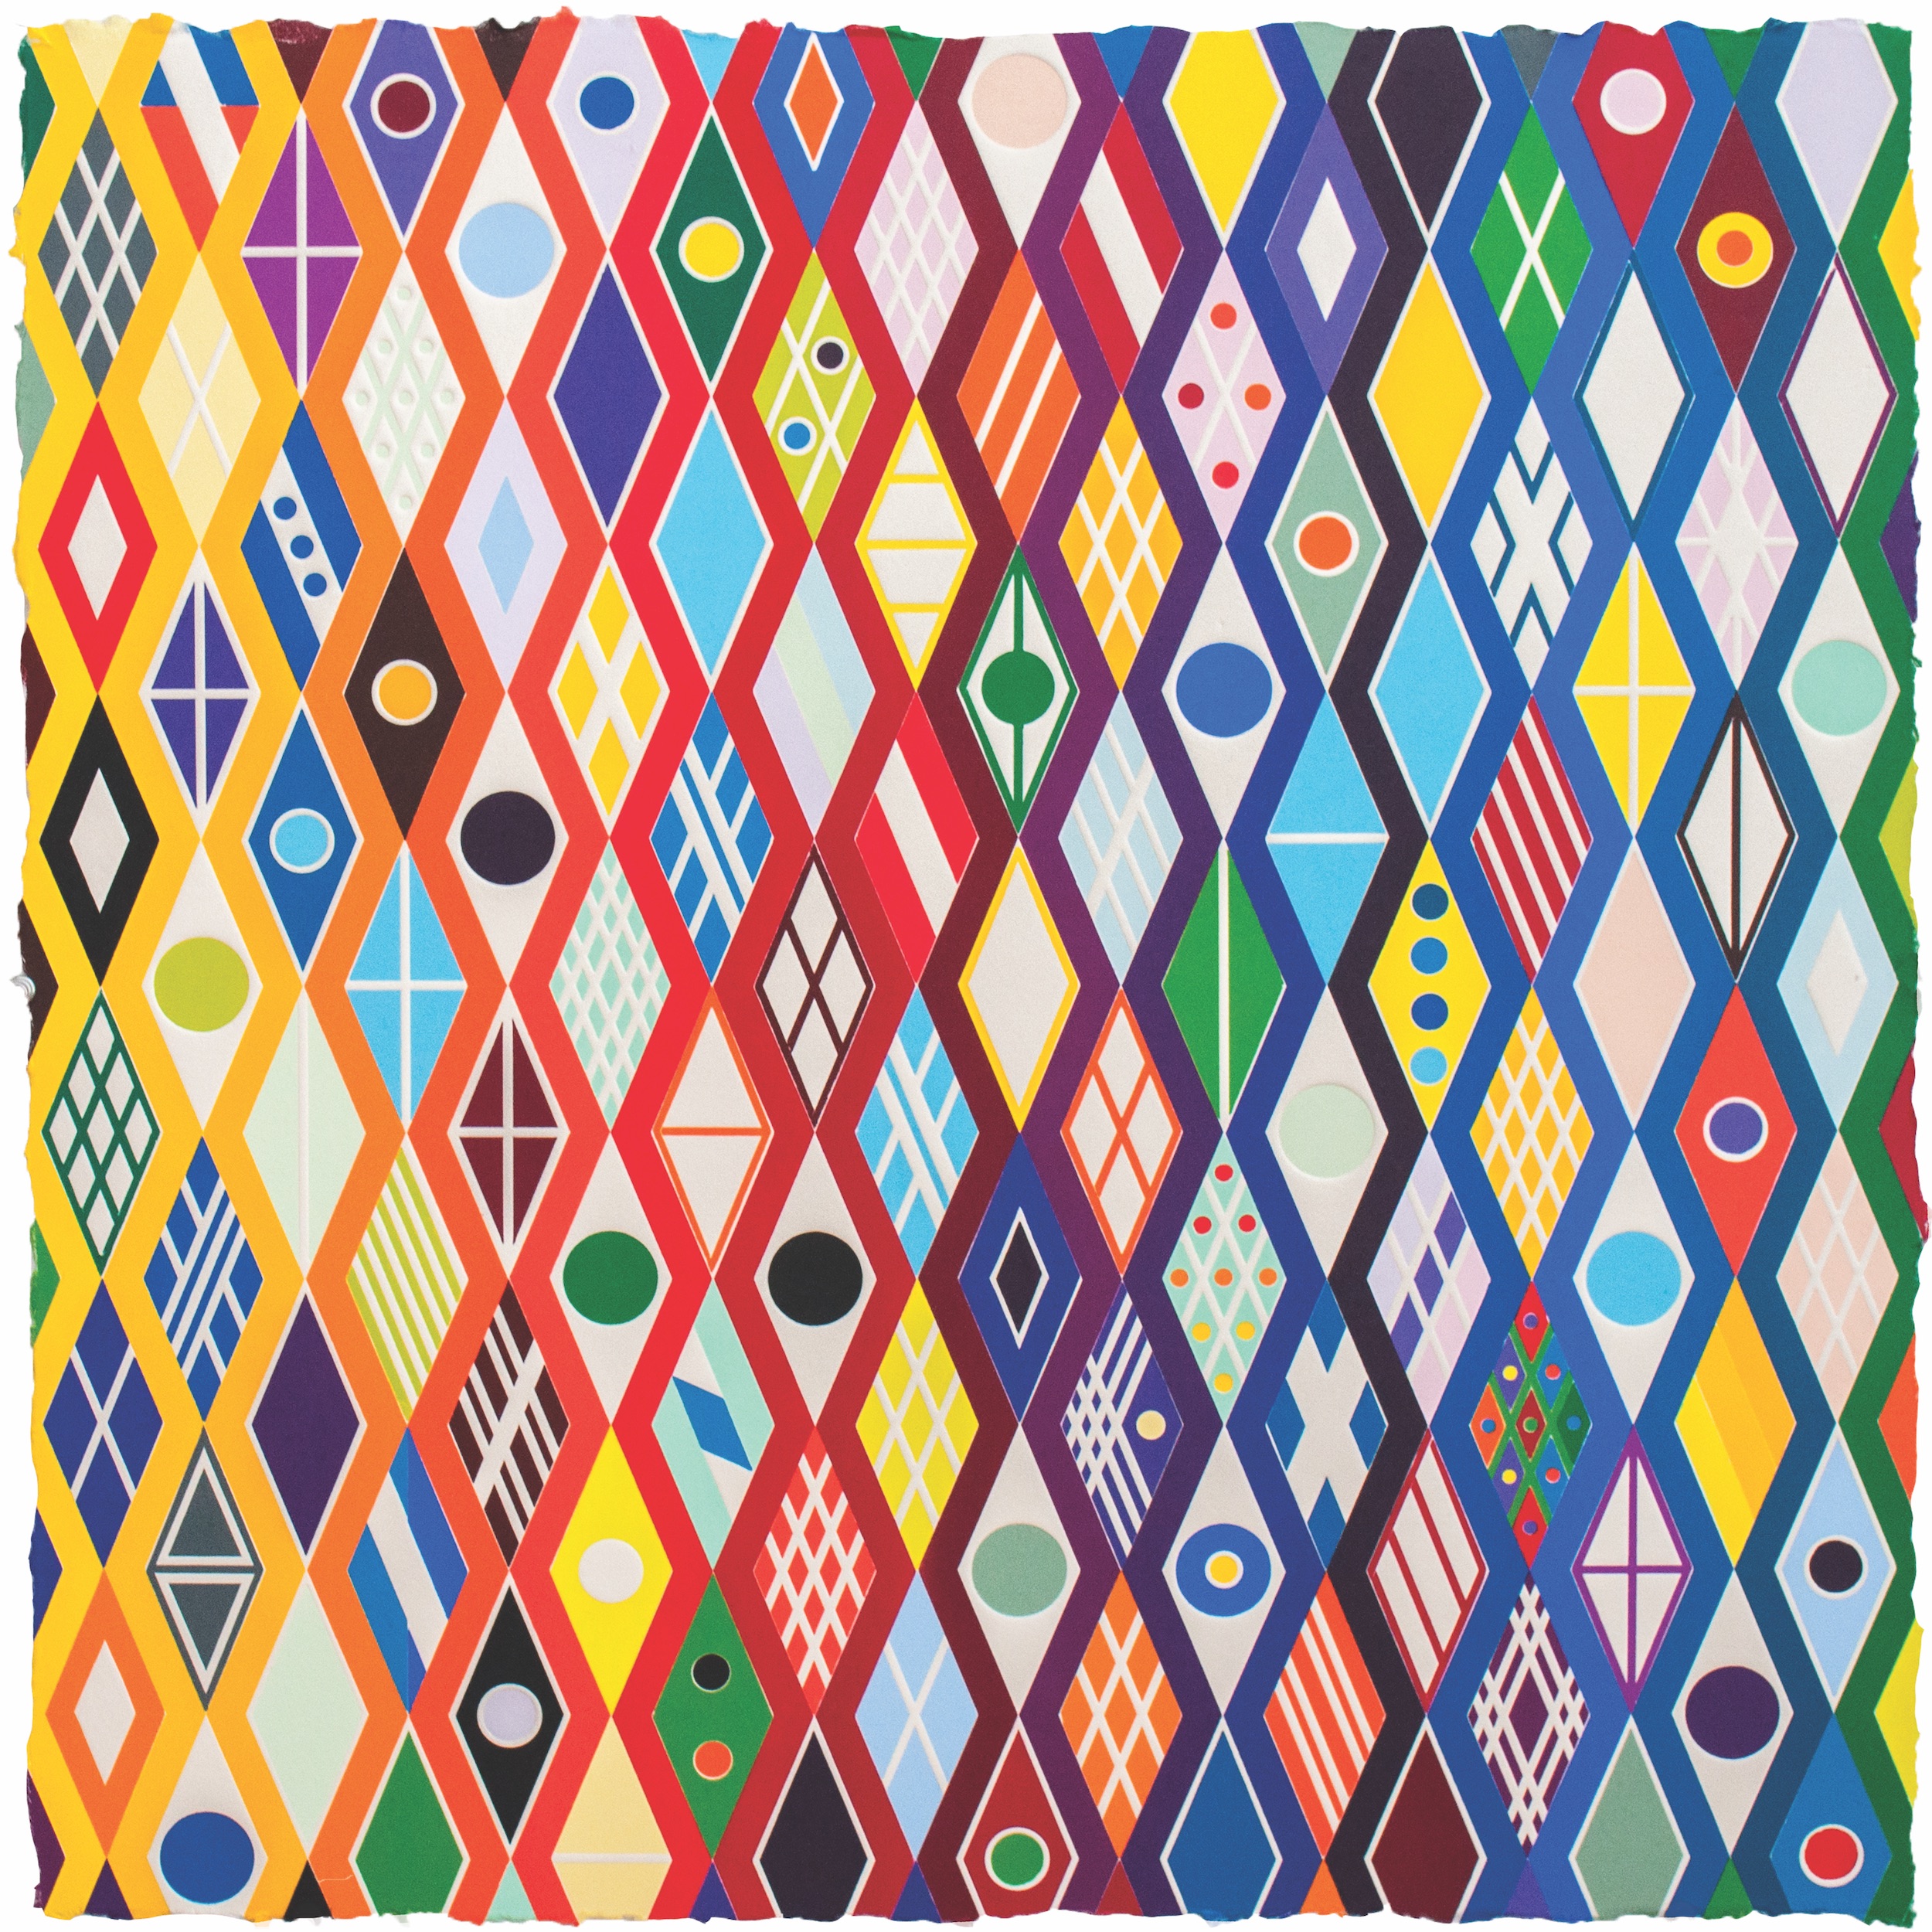 Multiple rhombus-shaped objects created by connected zig-zag lines in multiple colors fill the canvas. Each rhombus is filled with different colors, shapes, and patterns.